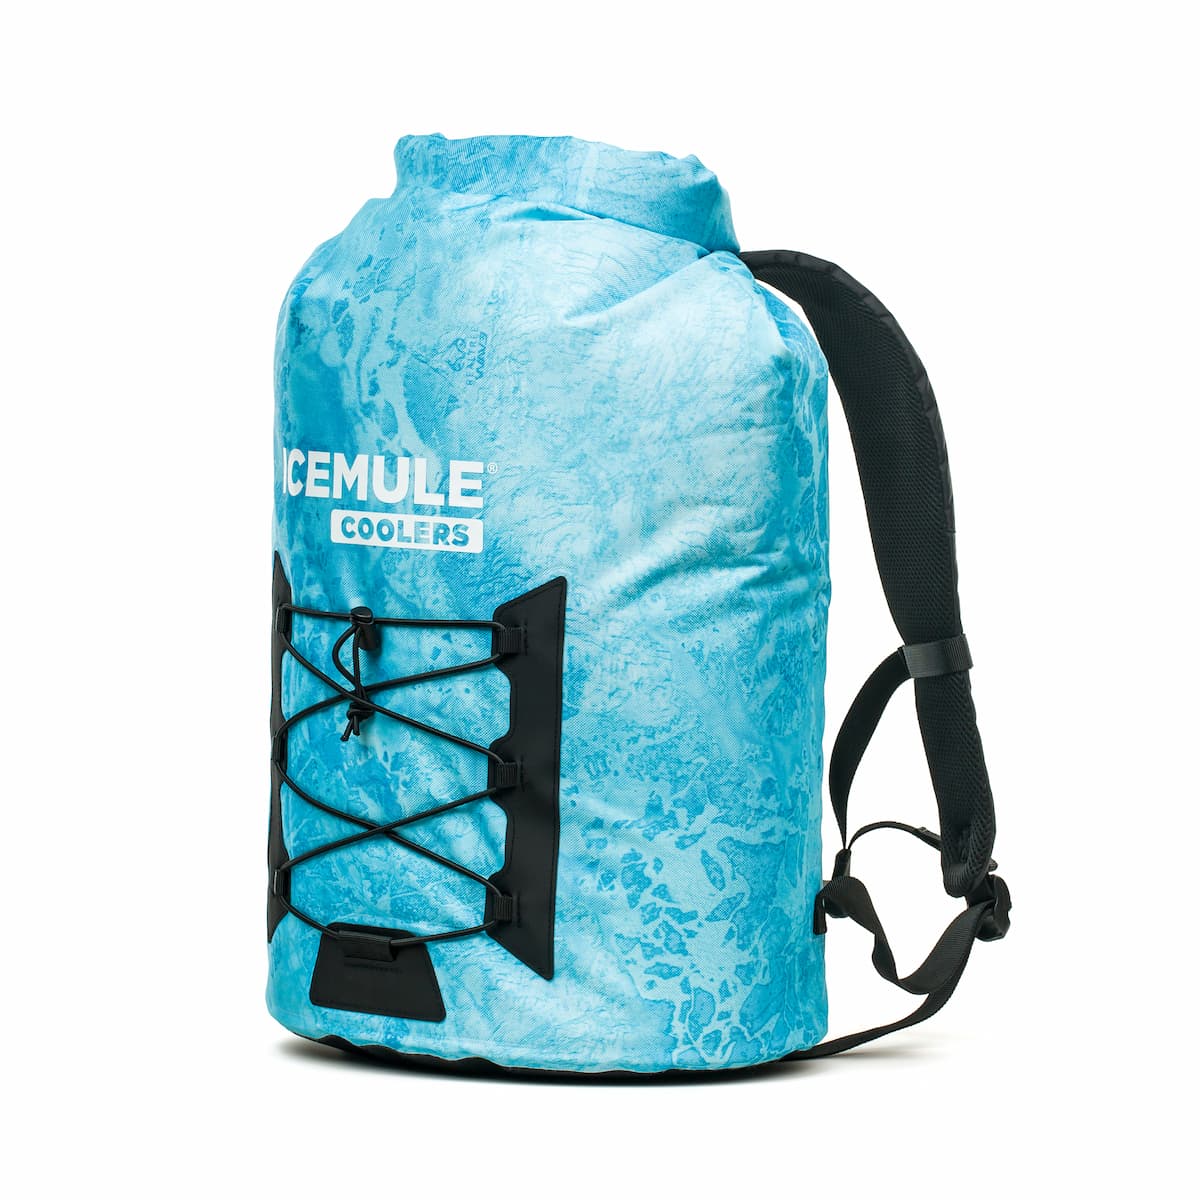 IceMule Pro Insulated Backpack Cooler Bag